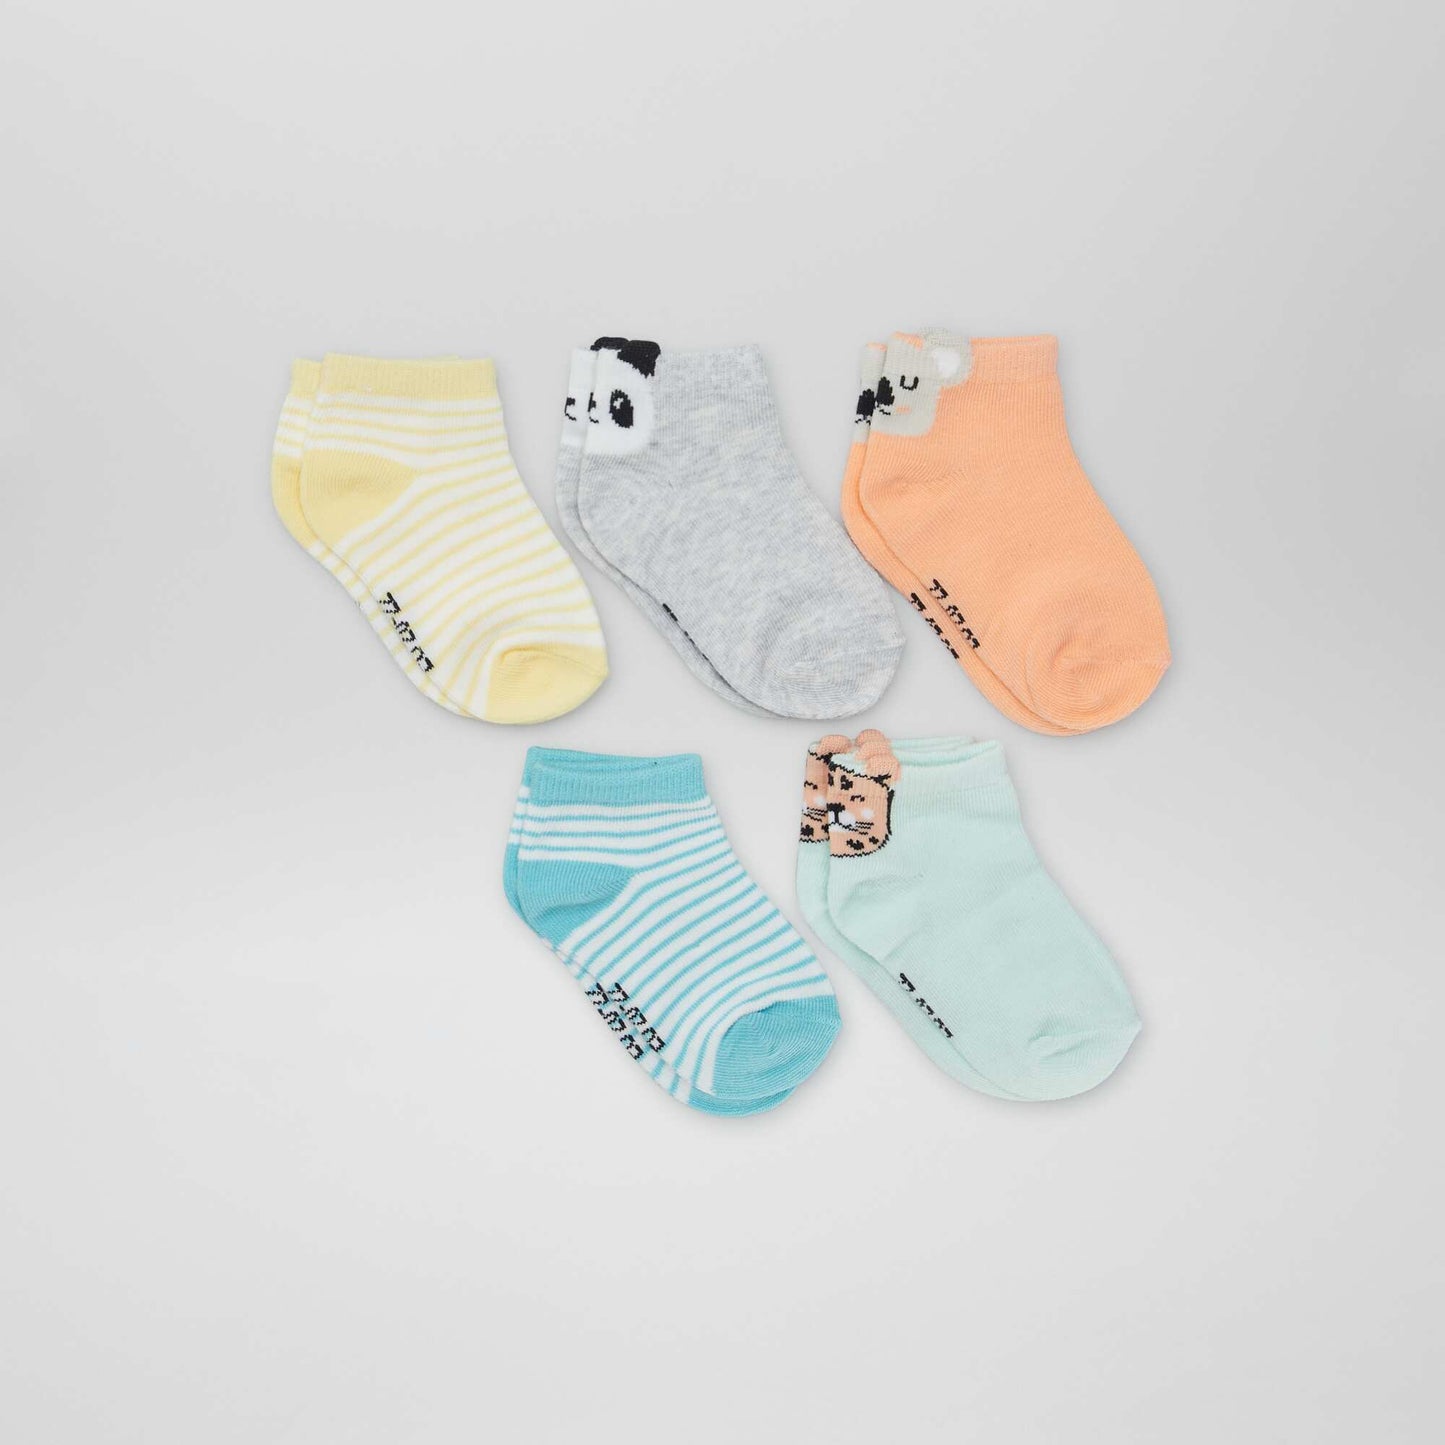 Pack of 5 pairs of invisible socks ORANGE